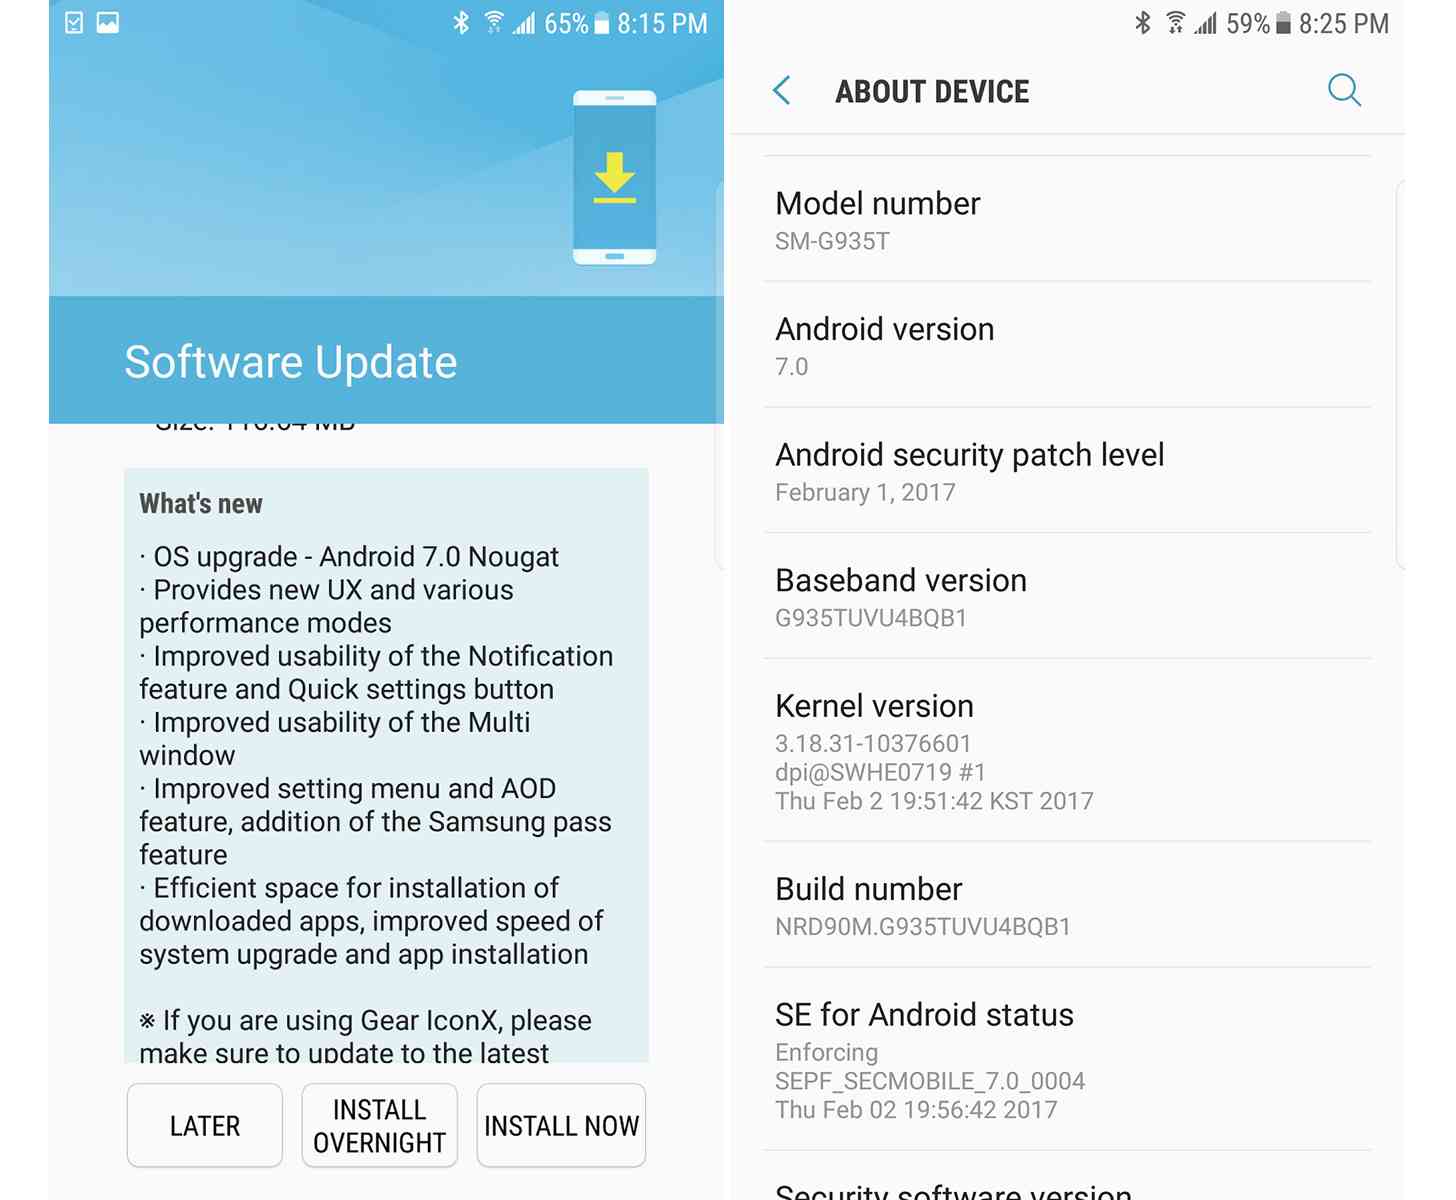 T-Mobile Galaxy S7 edge Android 7.0 Nougat update